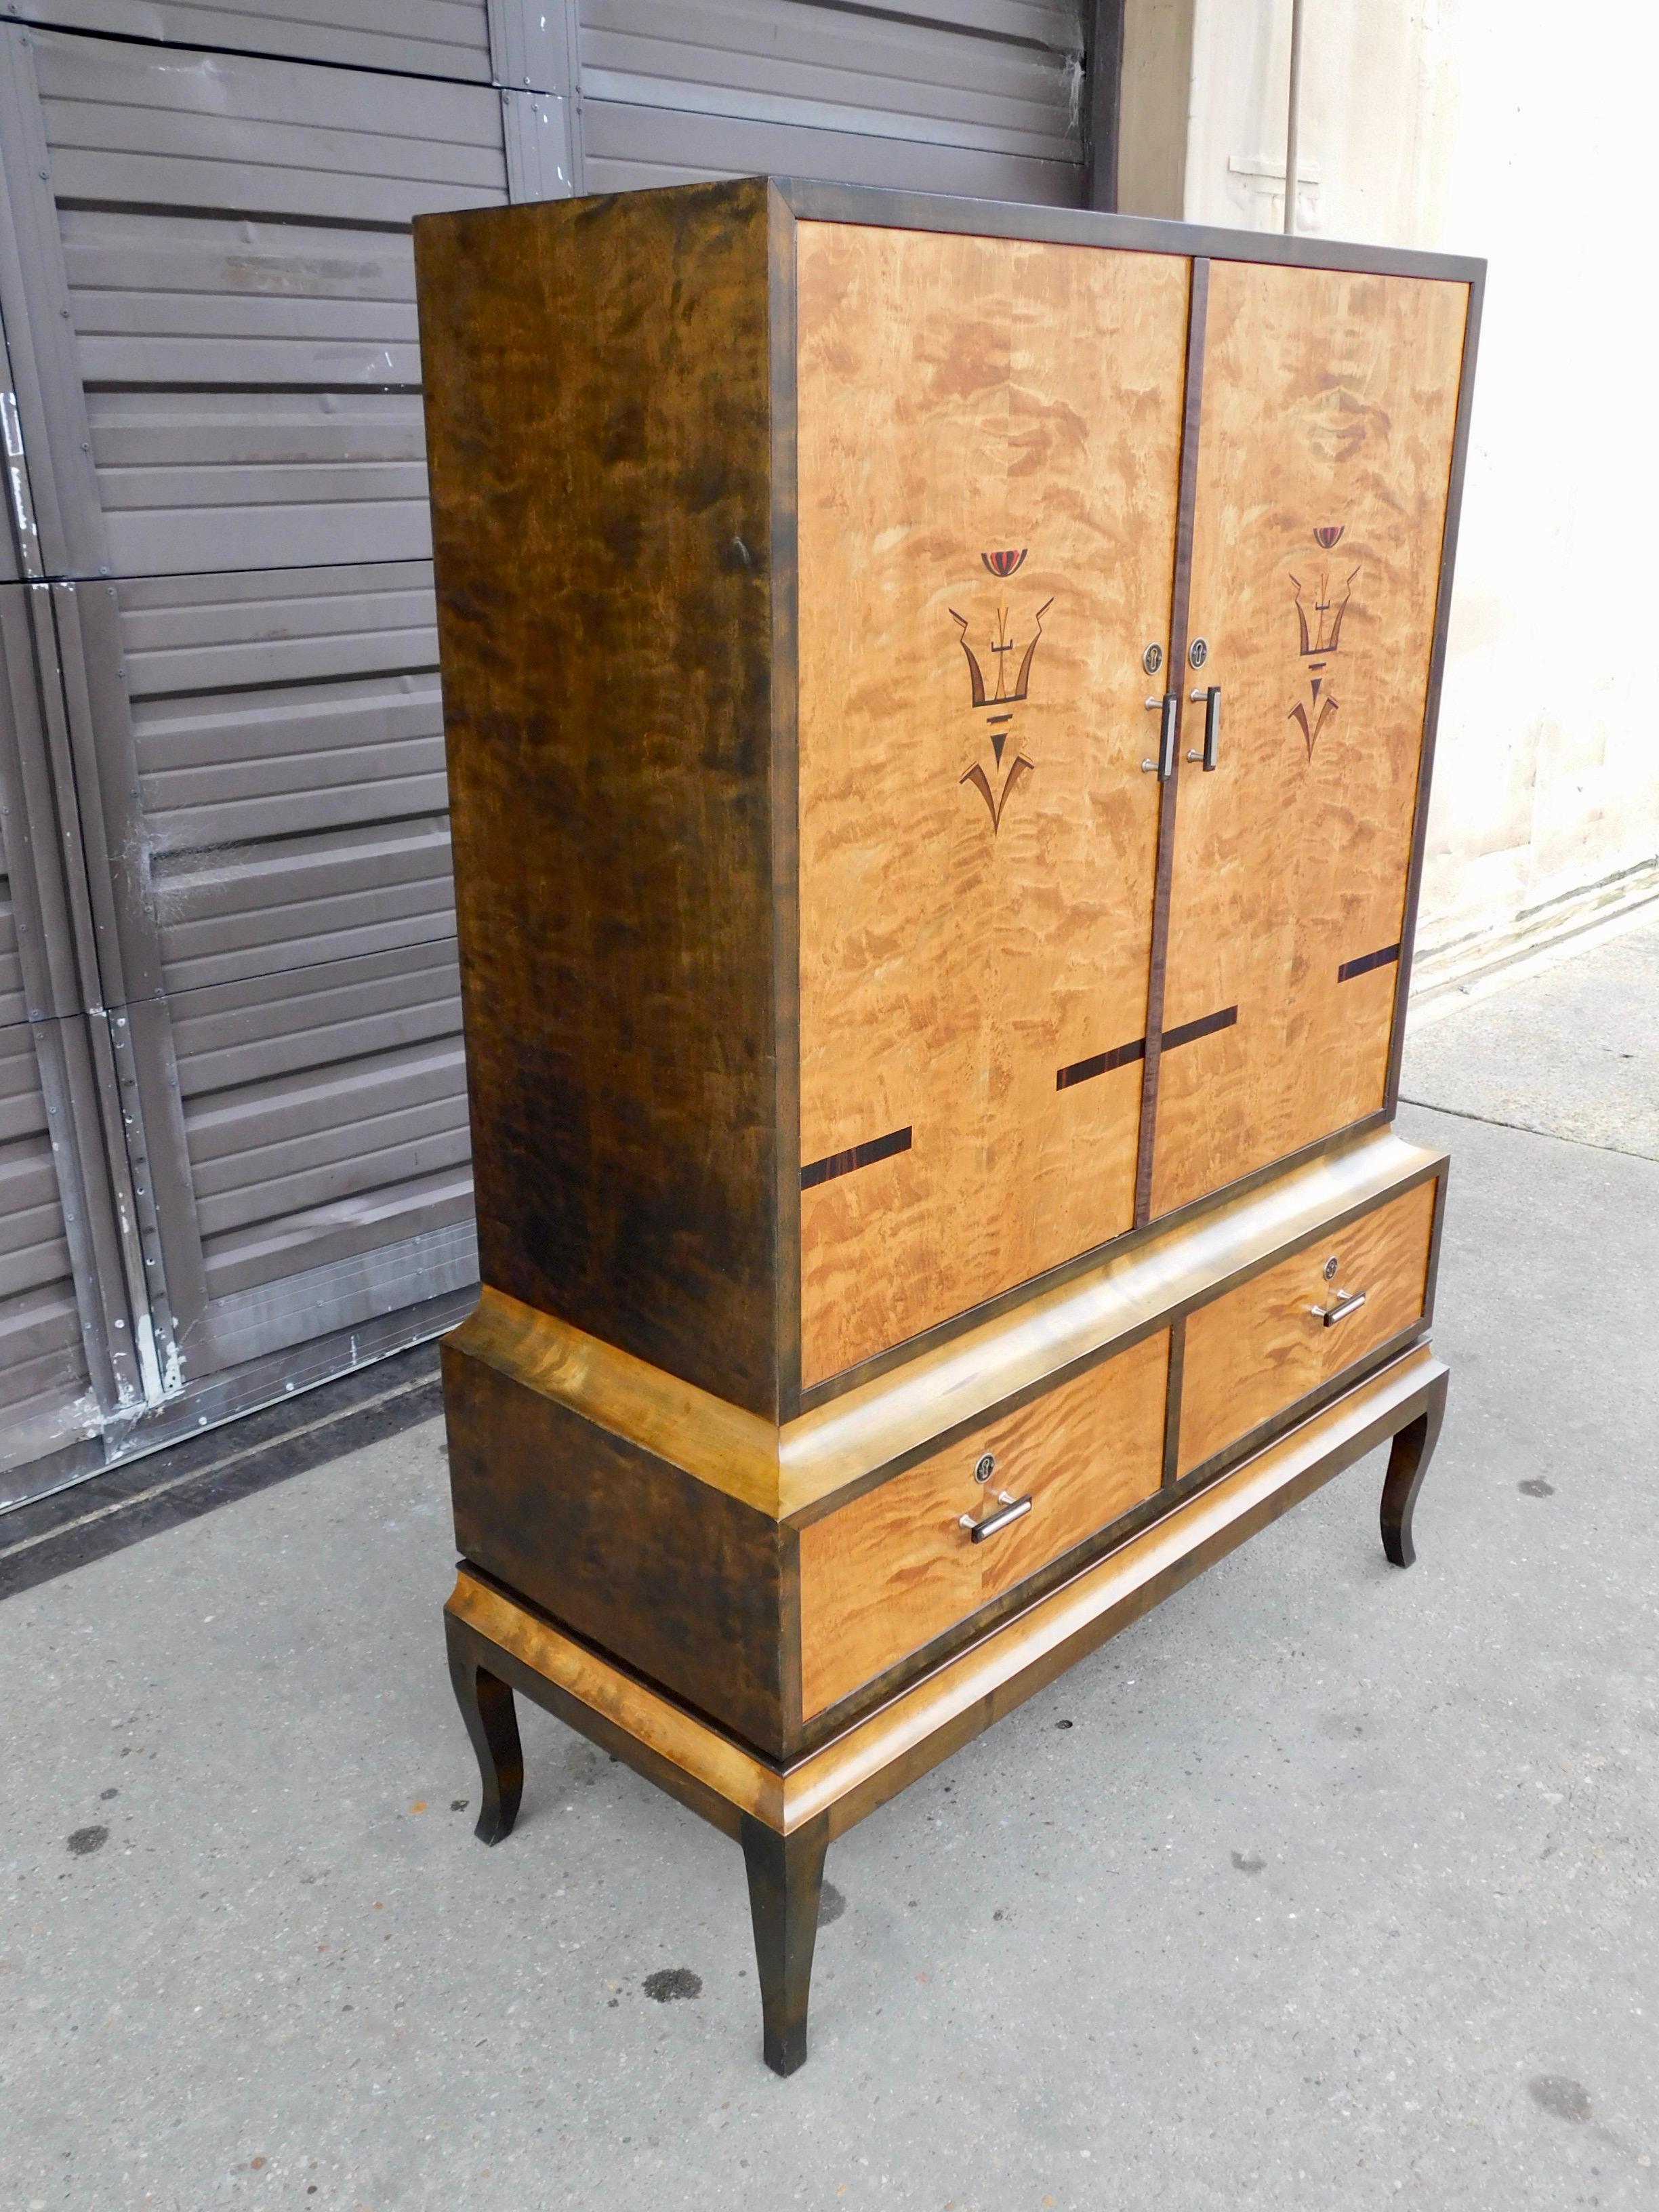 Swedish Art Deco inlaid storage cabinet rendered in birch wood. With doors in highly figured bookmatched birch wood. Inlaid on doors in rosewood and ebony. Case in dark stained birch wood. With two original shelves (solid birch wood) in the cabinet.